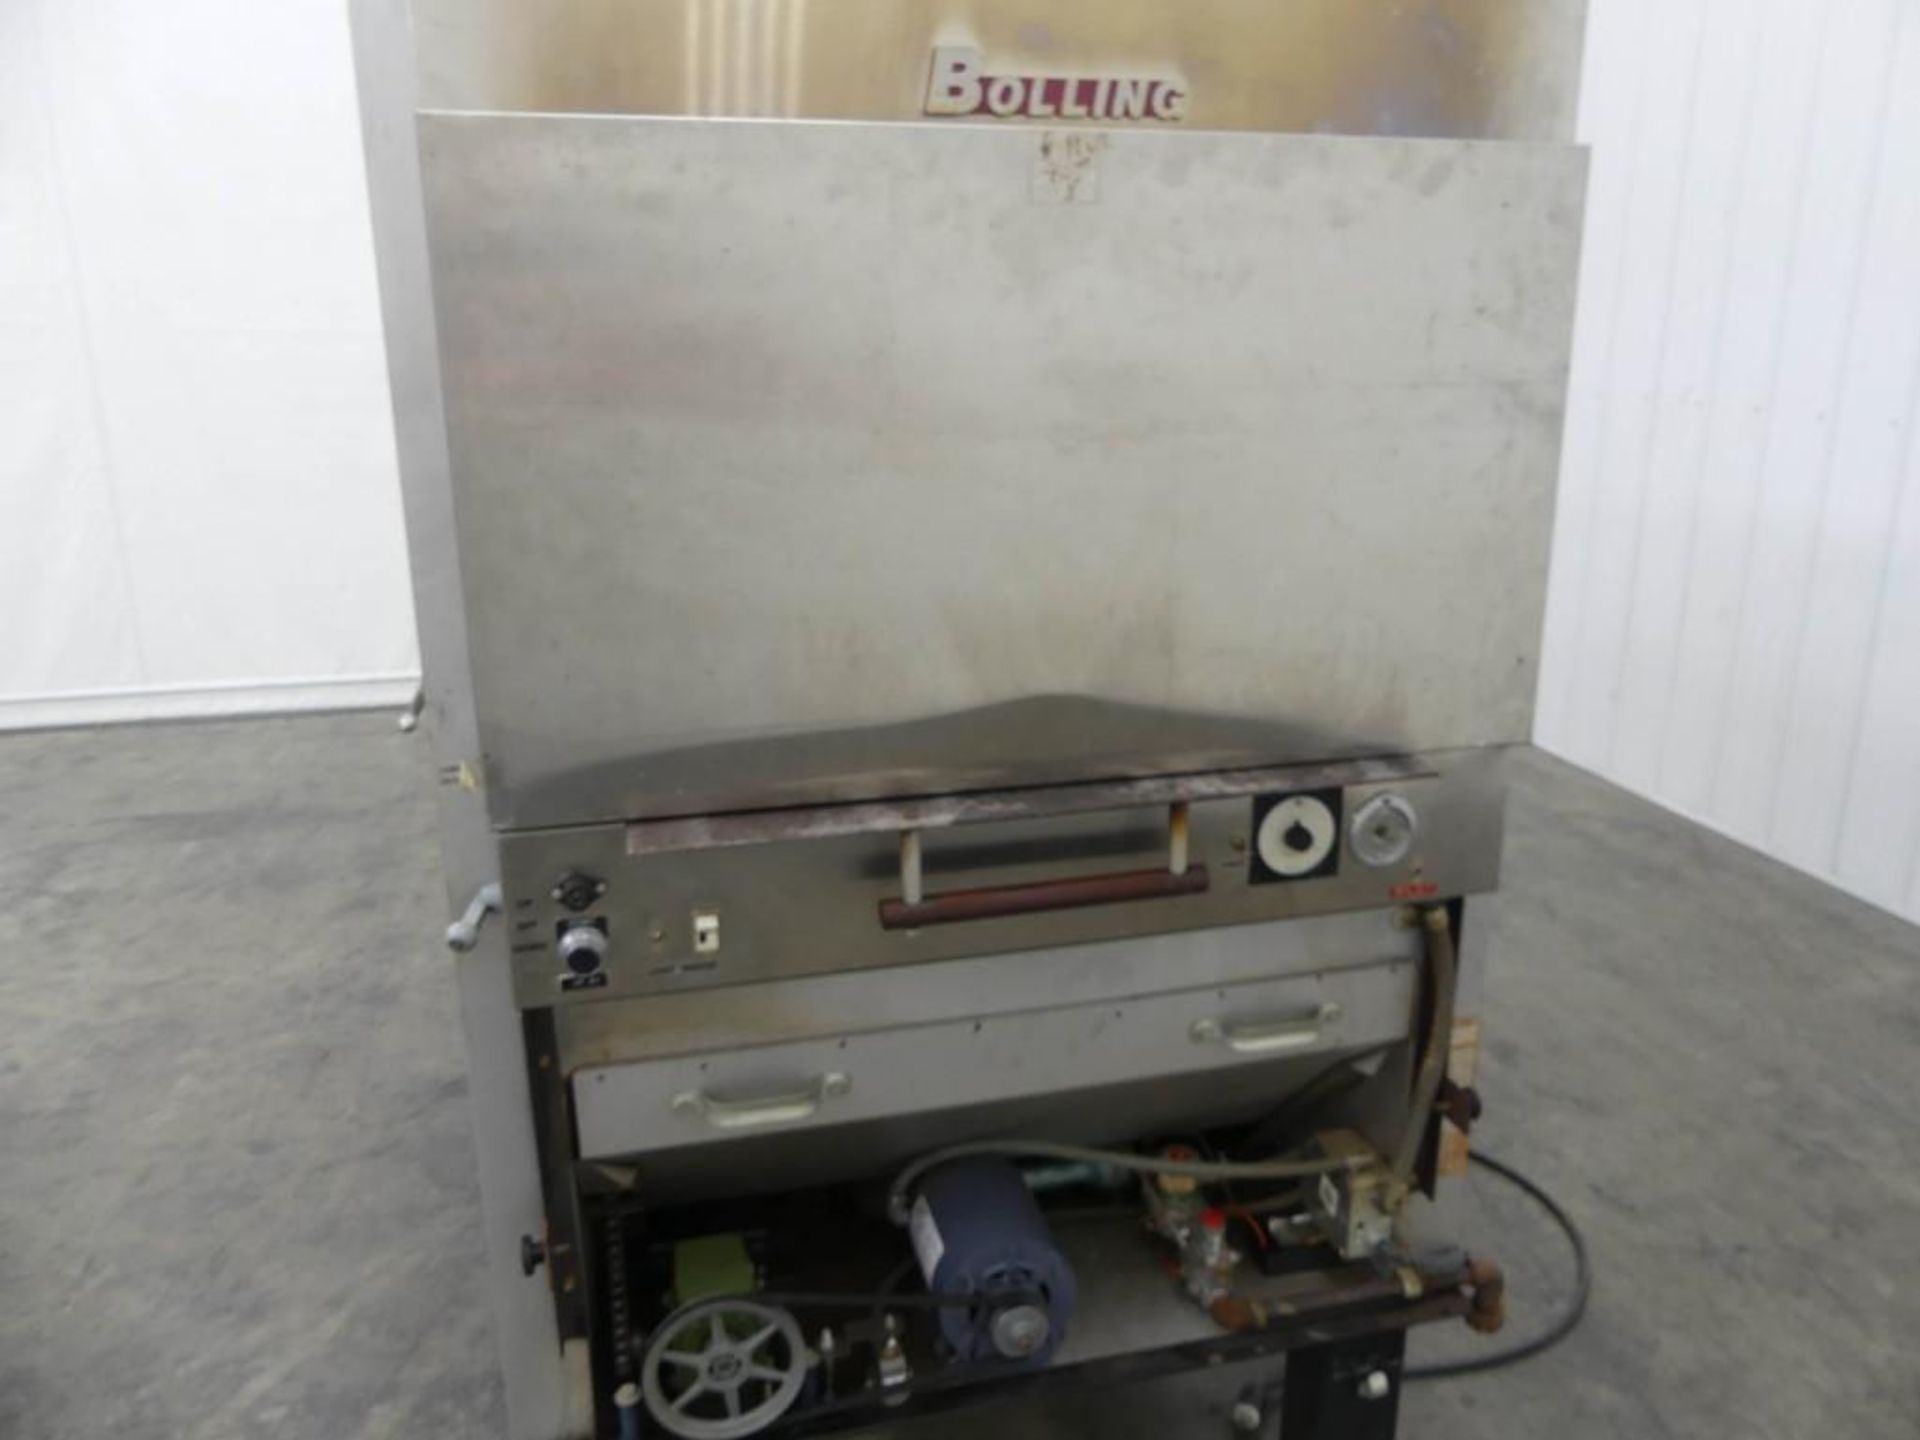 Bolling 500 M 5 Tray Revolving Rack SS Oven - Image 2 of 7